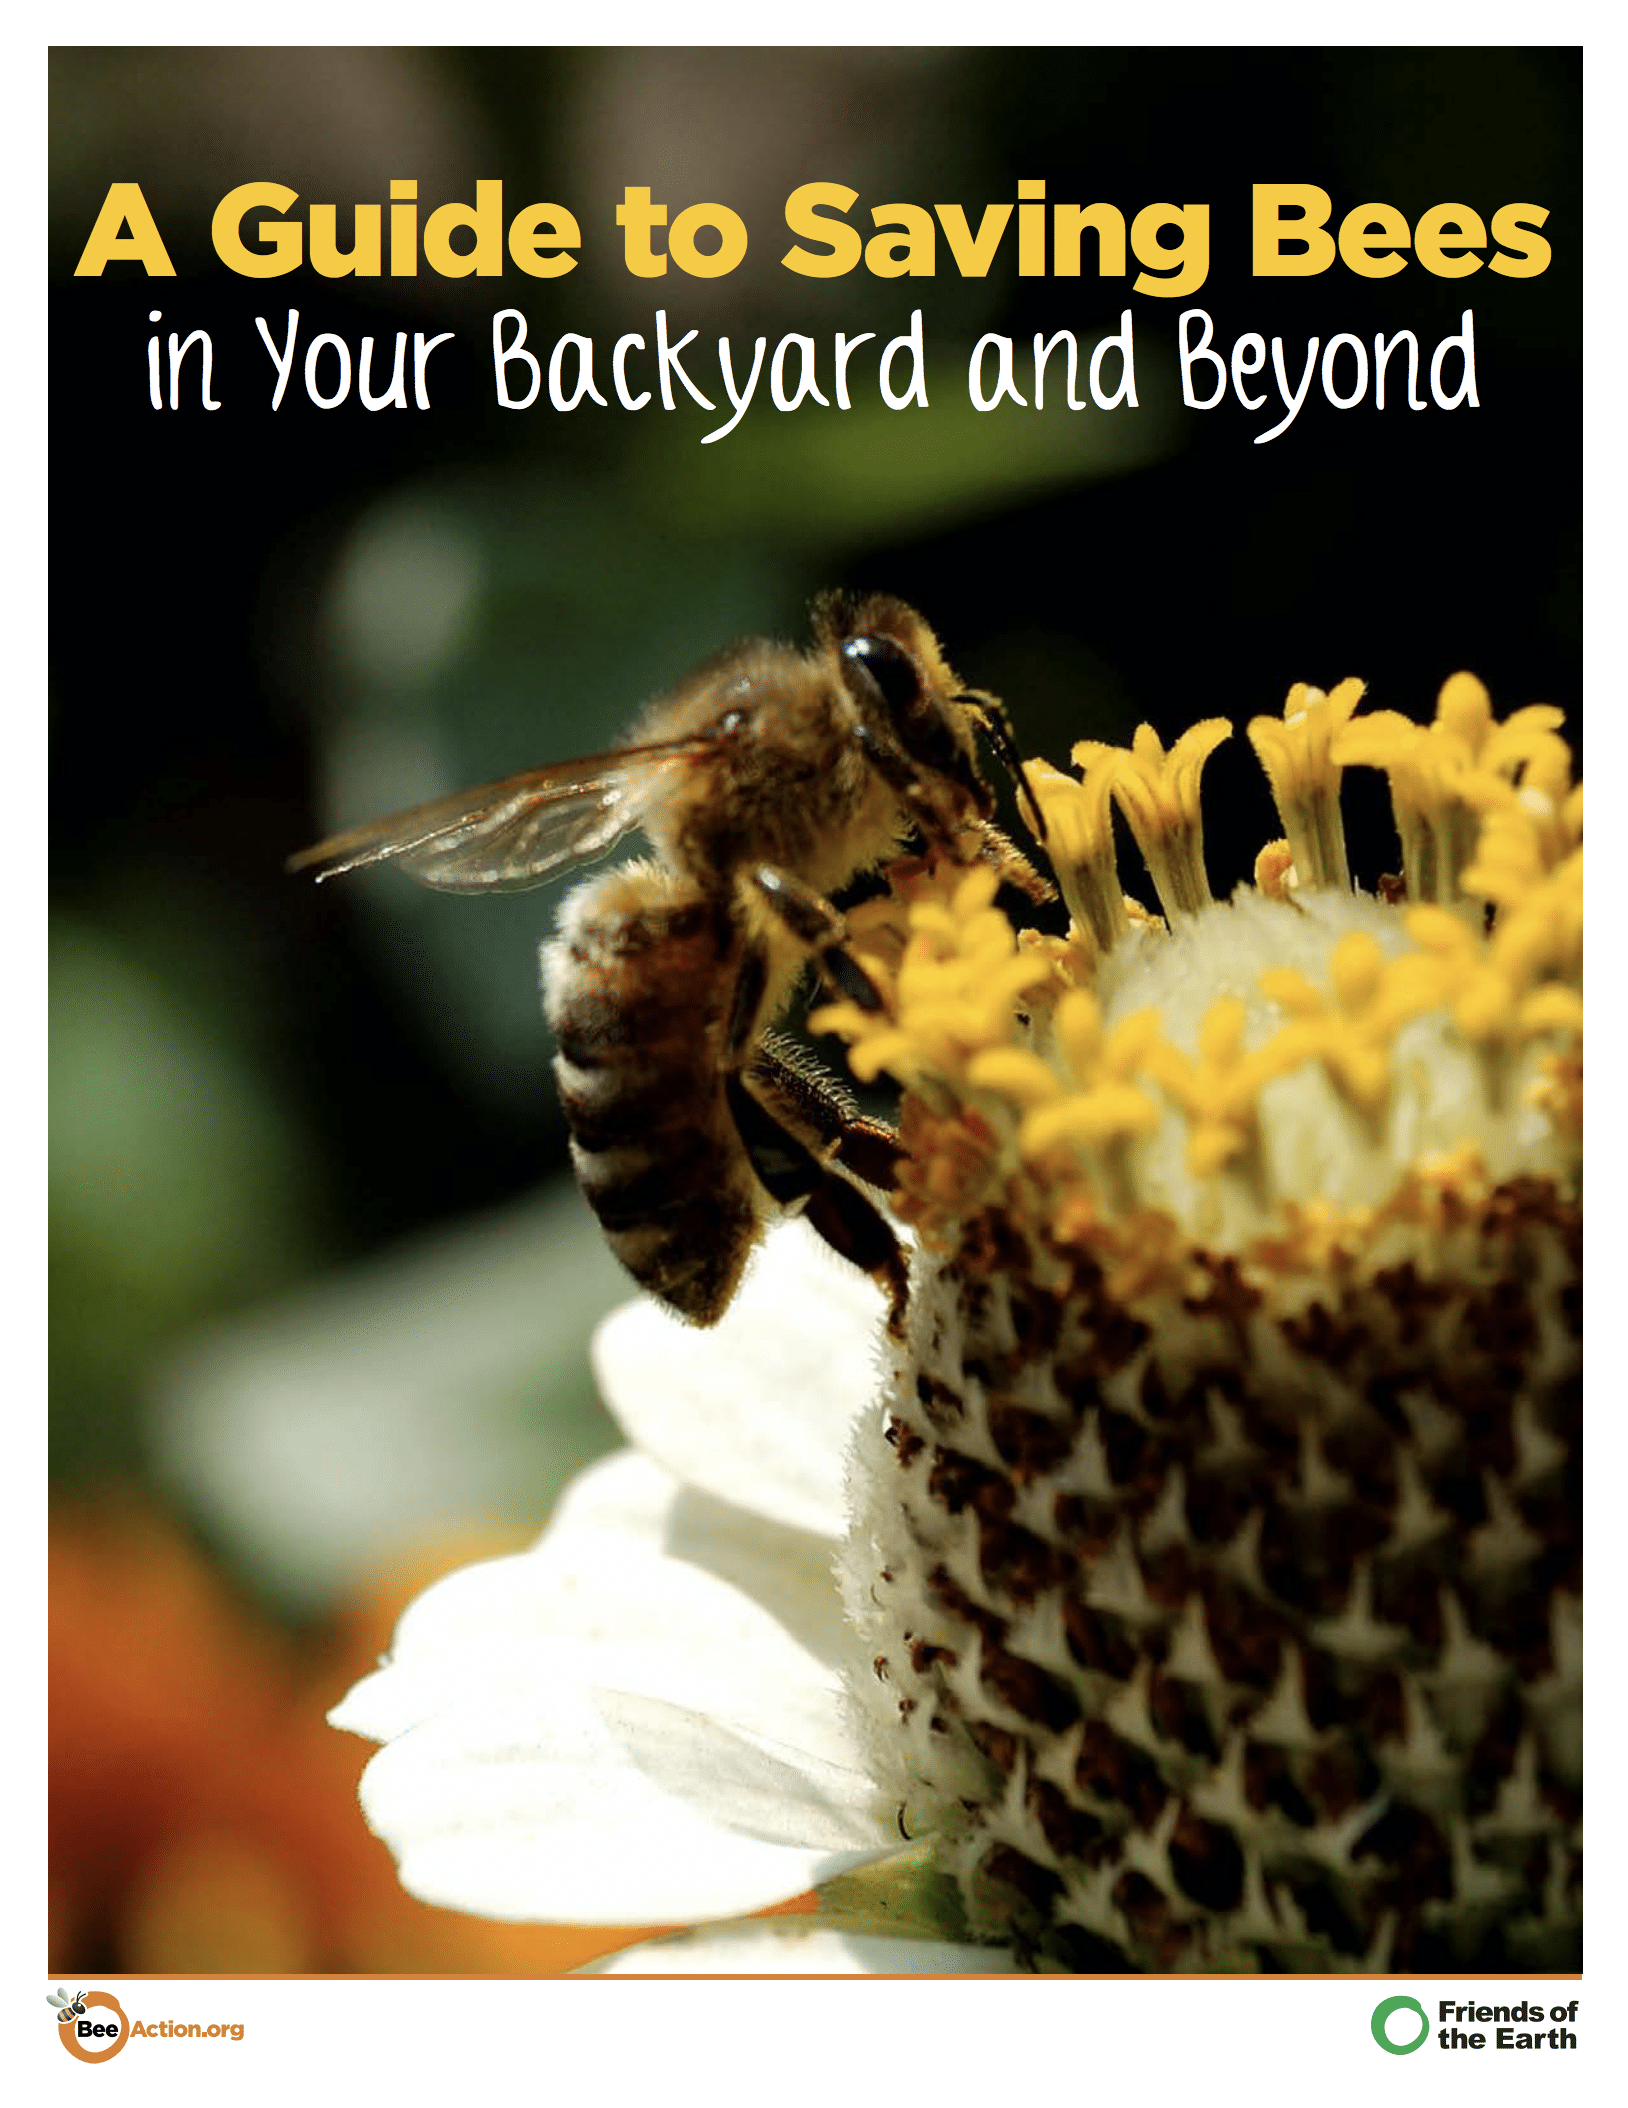 A Guide to Saving Bees in Your Backyard and Beyond